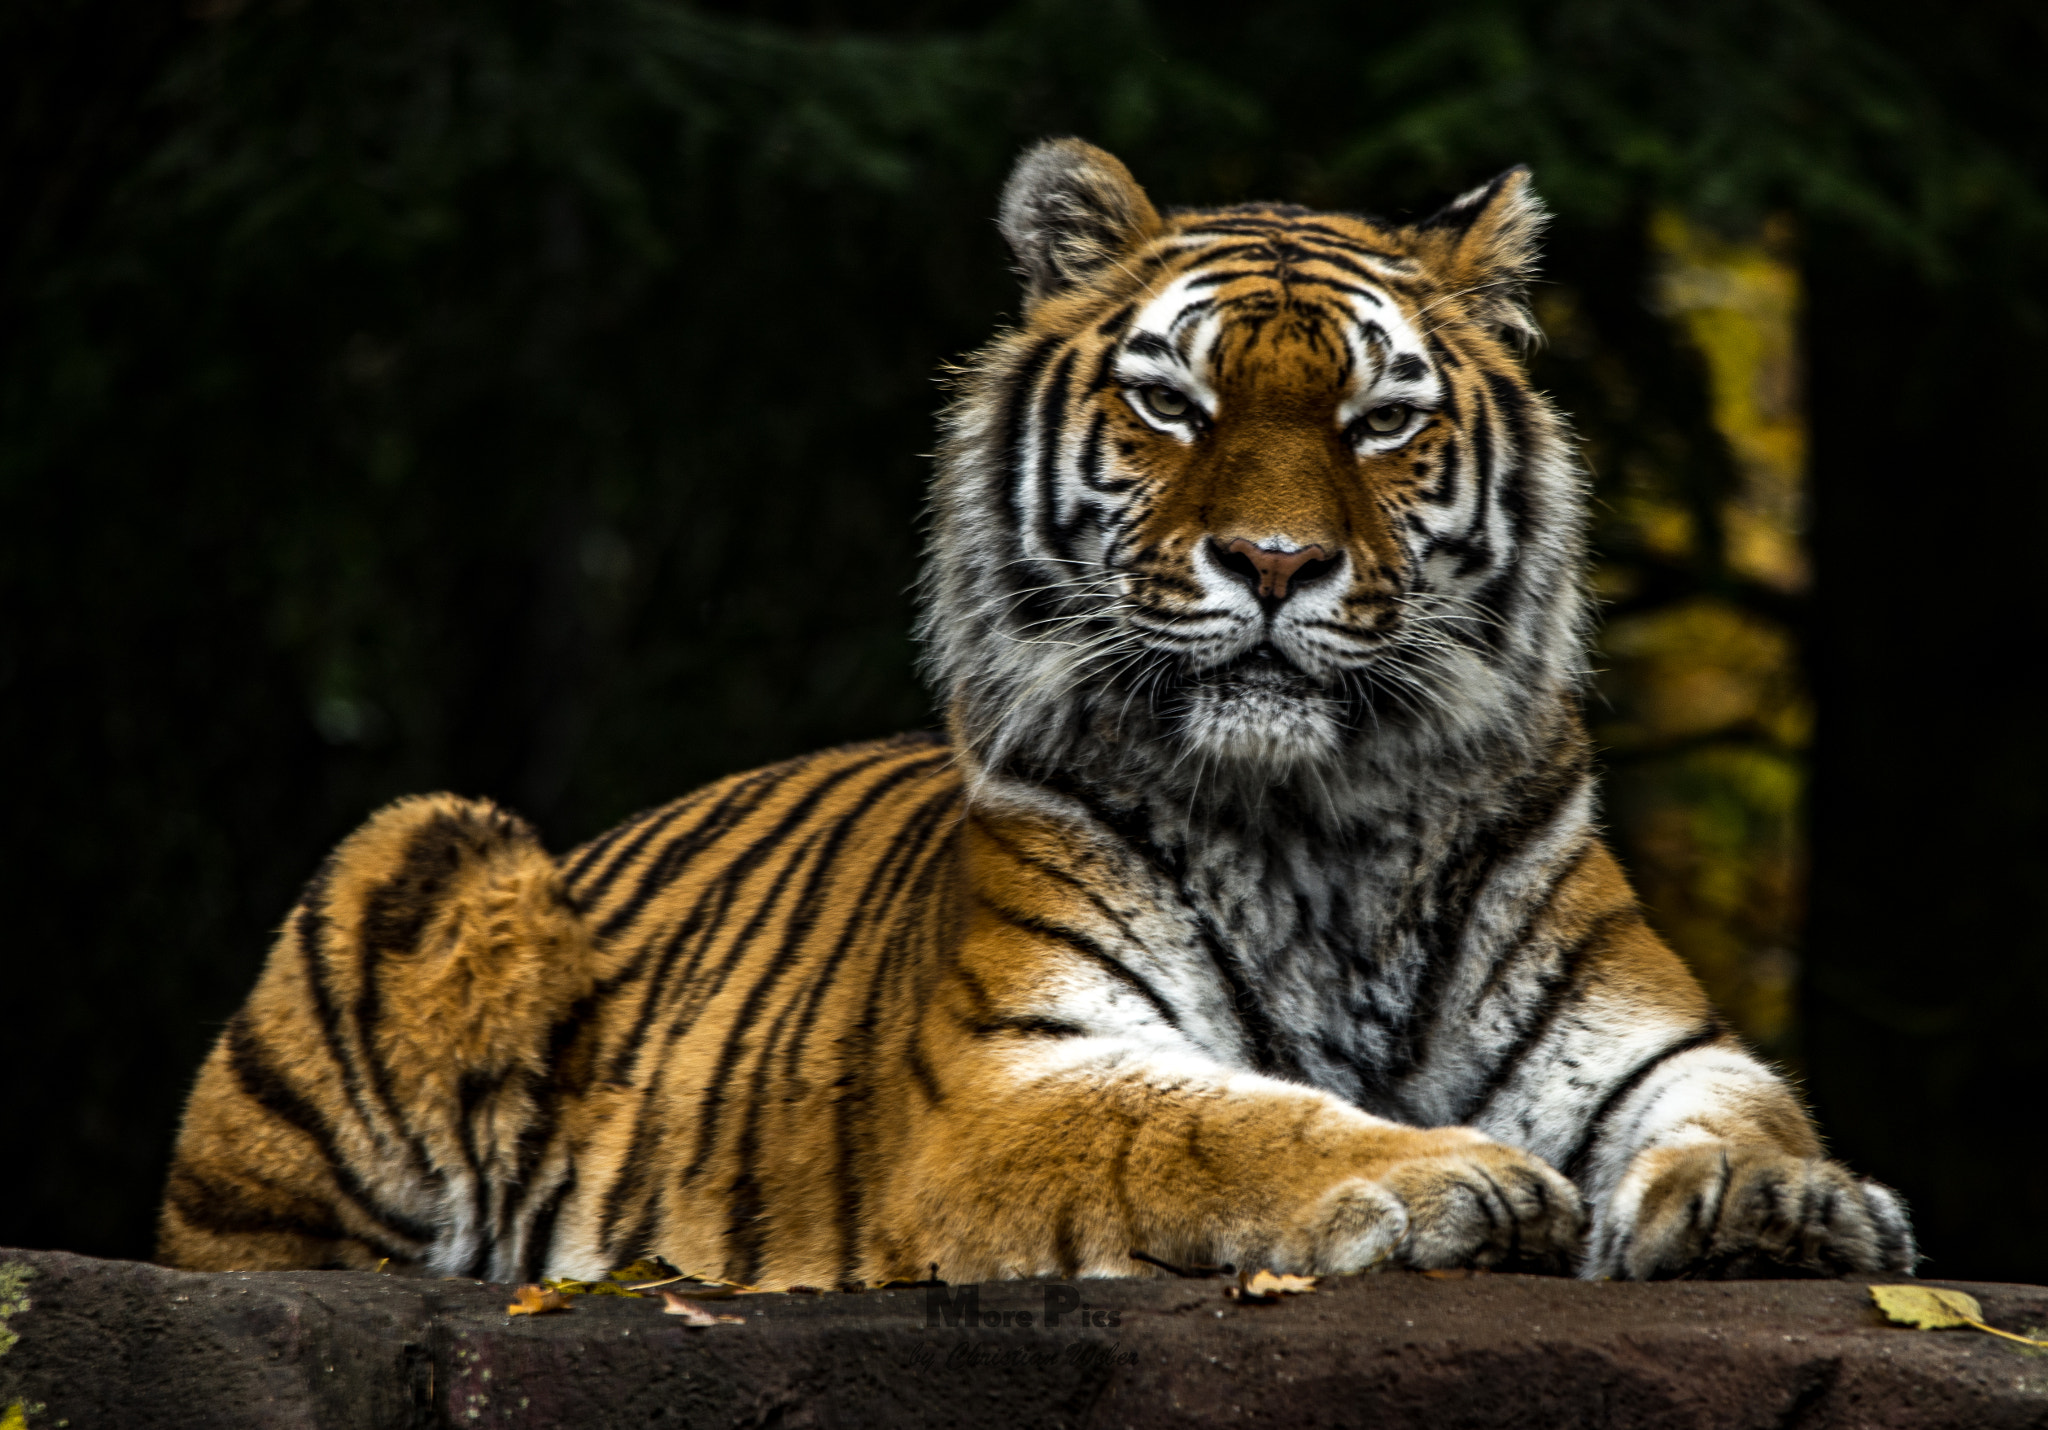 Sony a7 II sample photo. Tiger photography